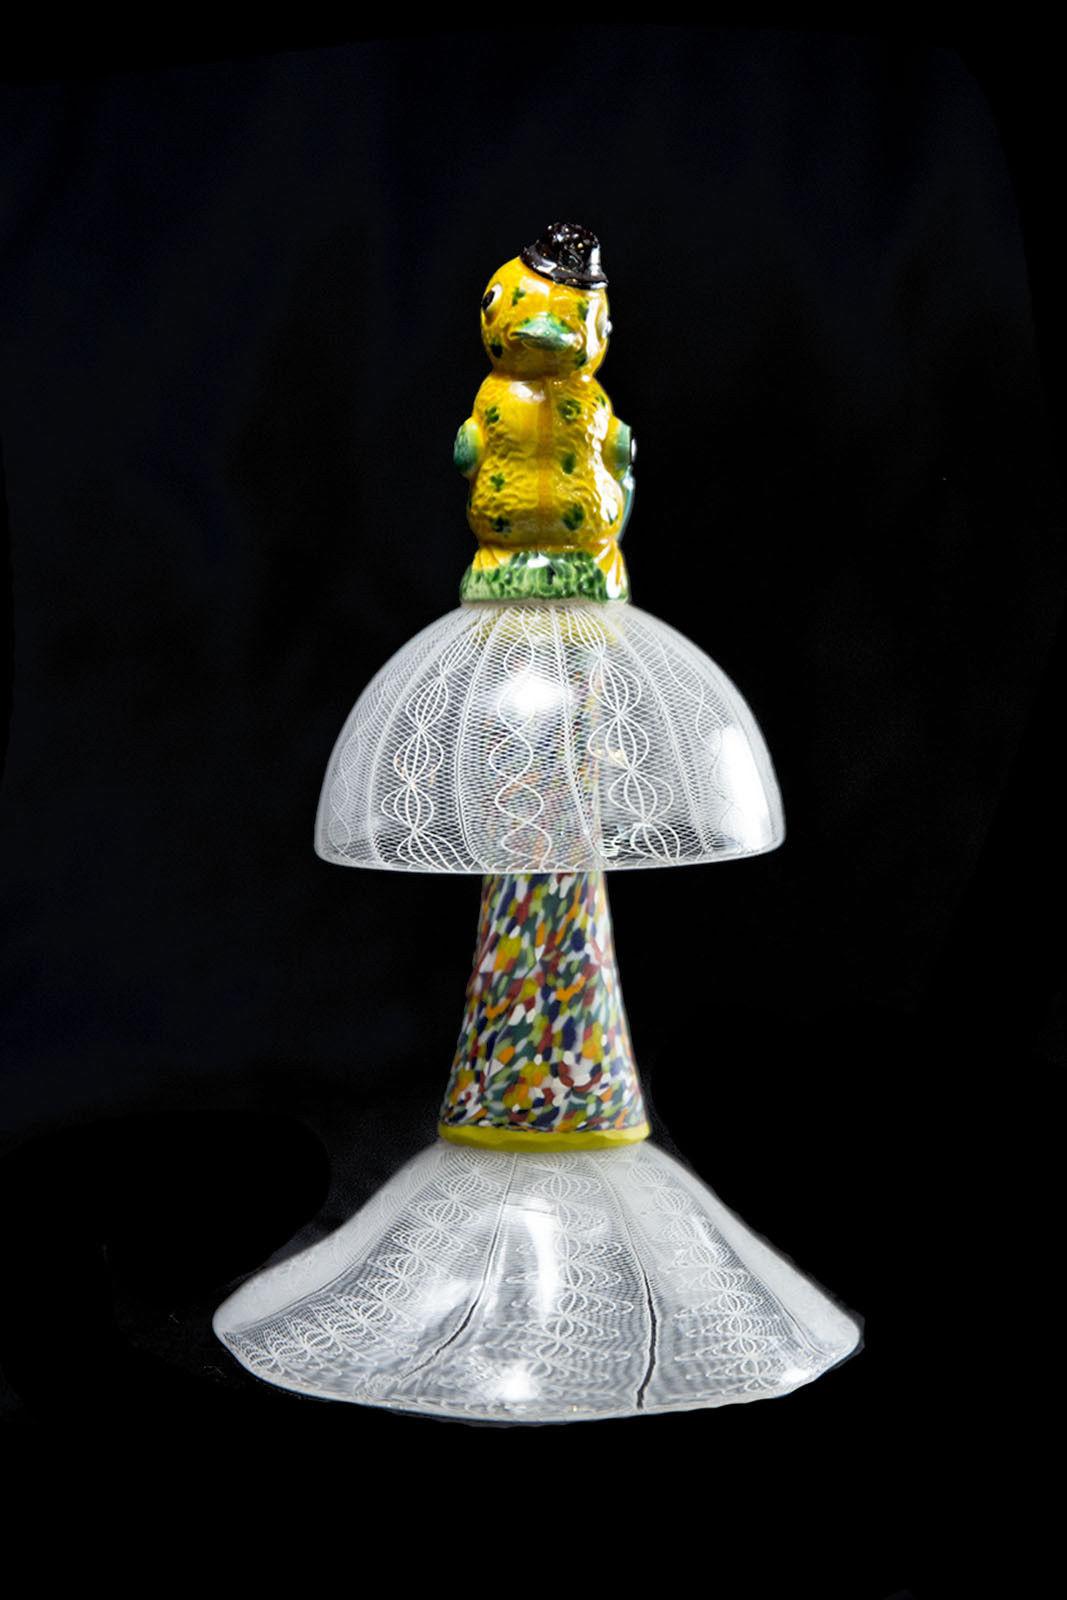 Richard Marquis – Jellyfish Salt Shaker, 2016
Zanfirico and granulare glass found object
Size: 9 x 5 inches
Signed and dated with copyright
Certificate of Authenticity included

A pioneer of American contemporary glass art, Richard Marquis is one of